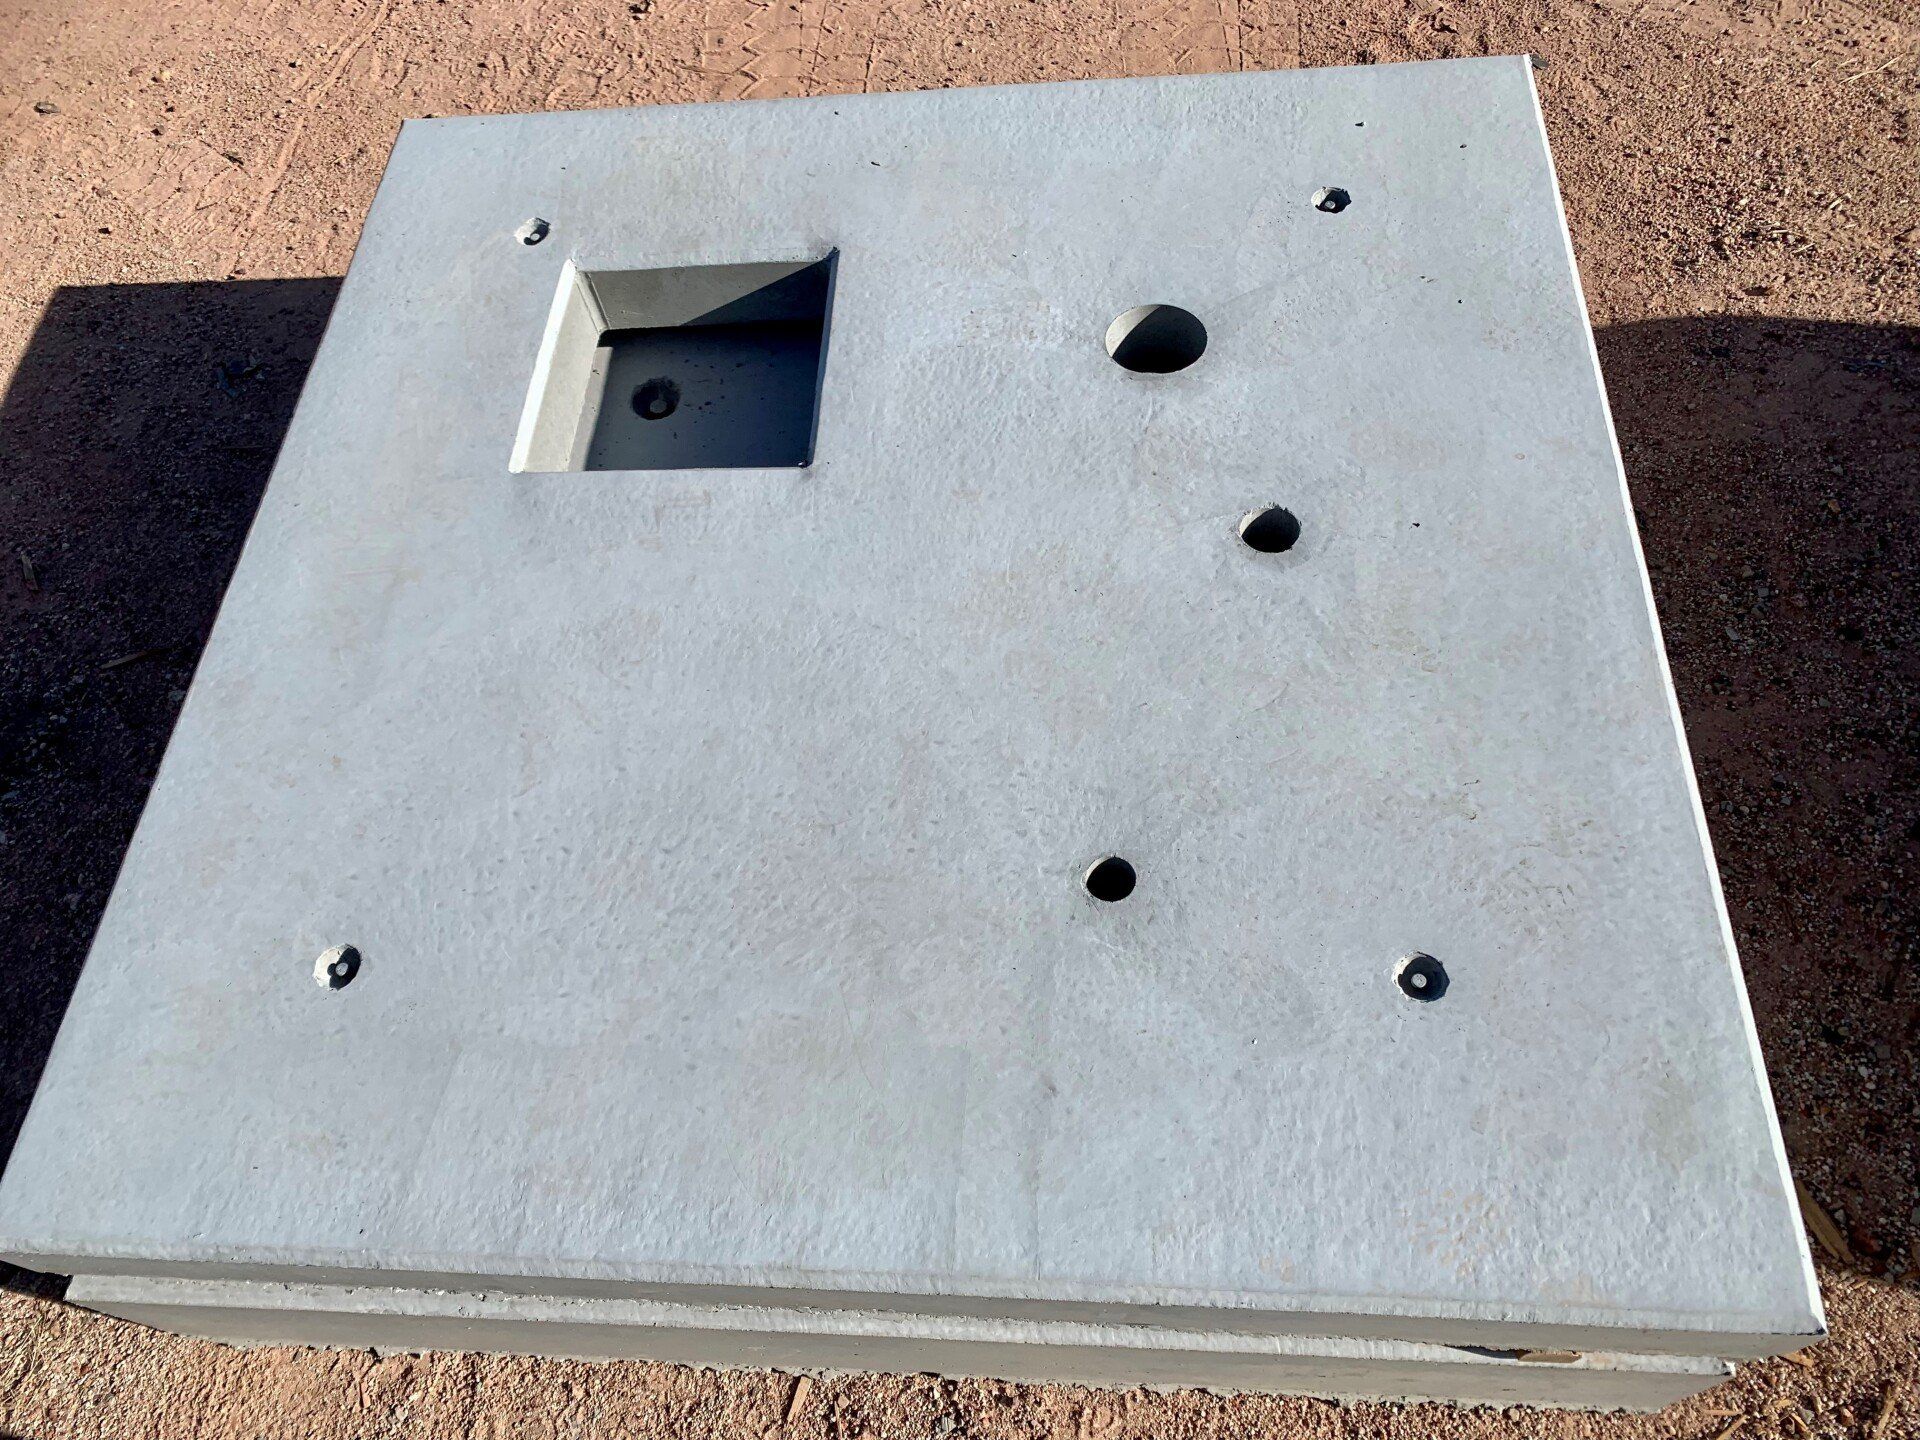 Sump lid with manhole